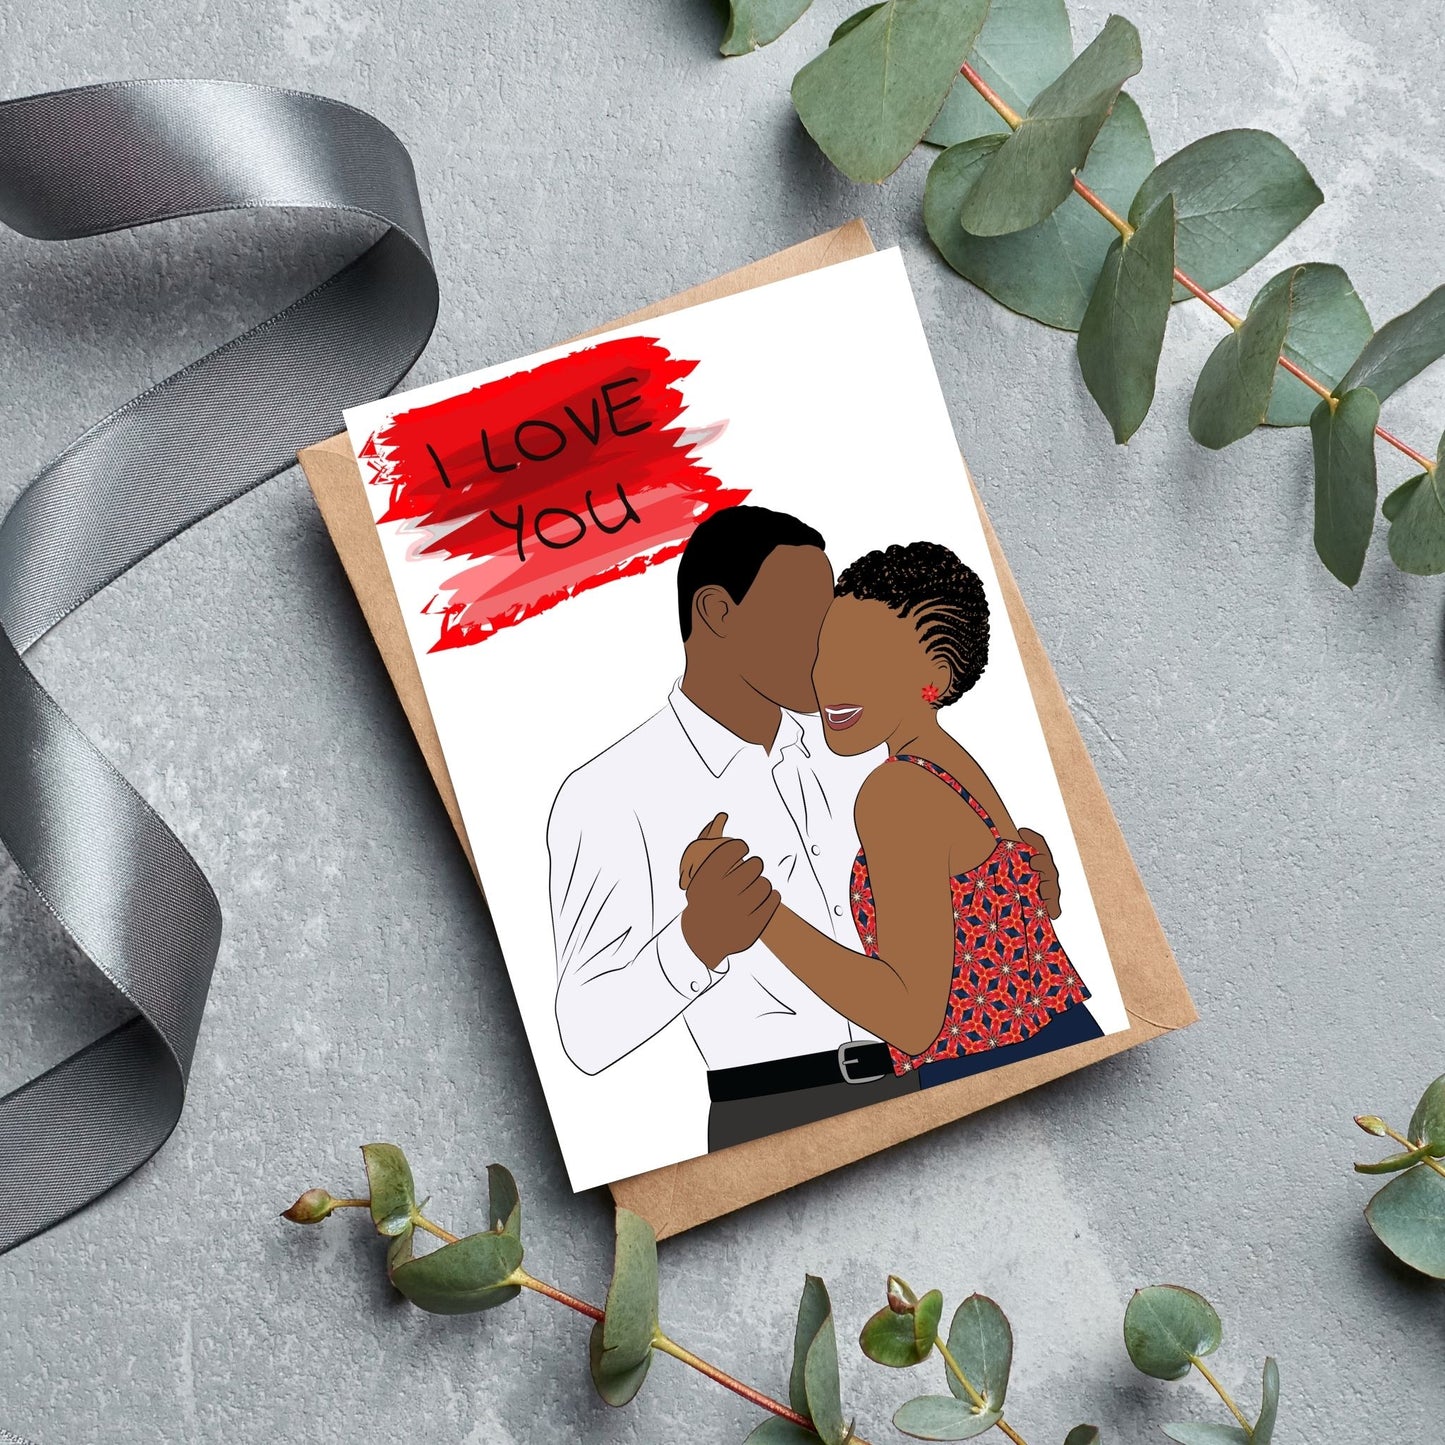 Happy Anniversary/I Love You Card Black Couple Black love Afrocentric Card - Valentines/Love